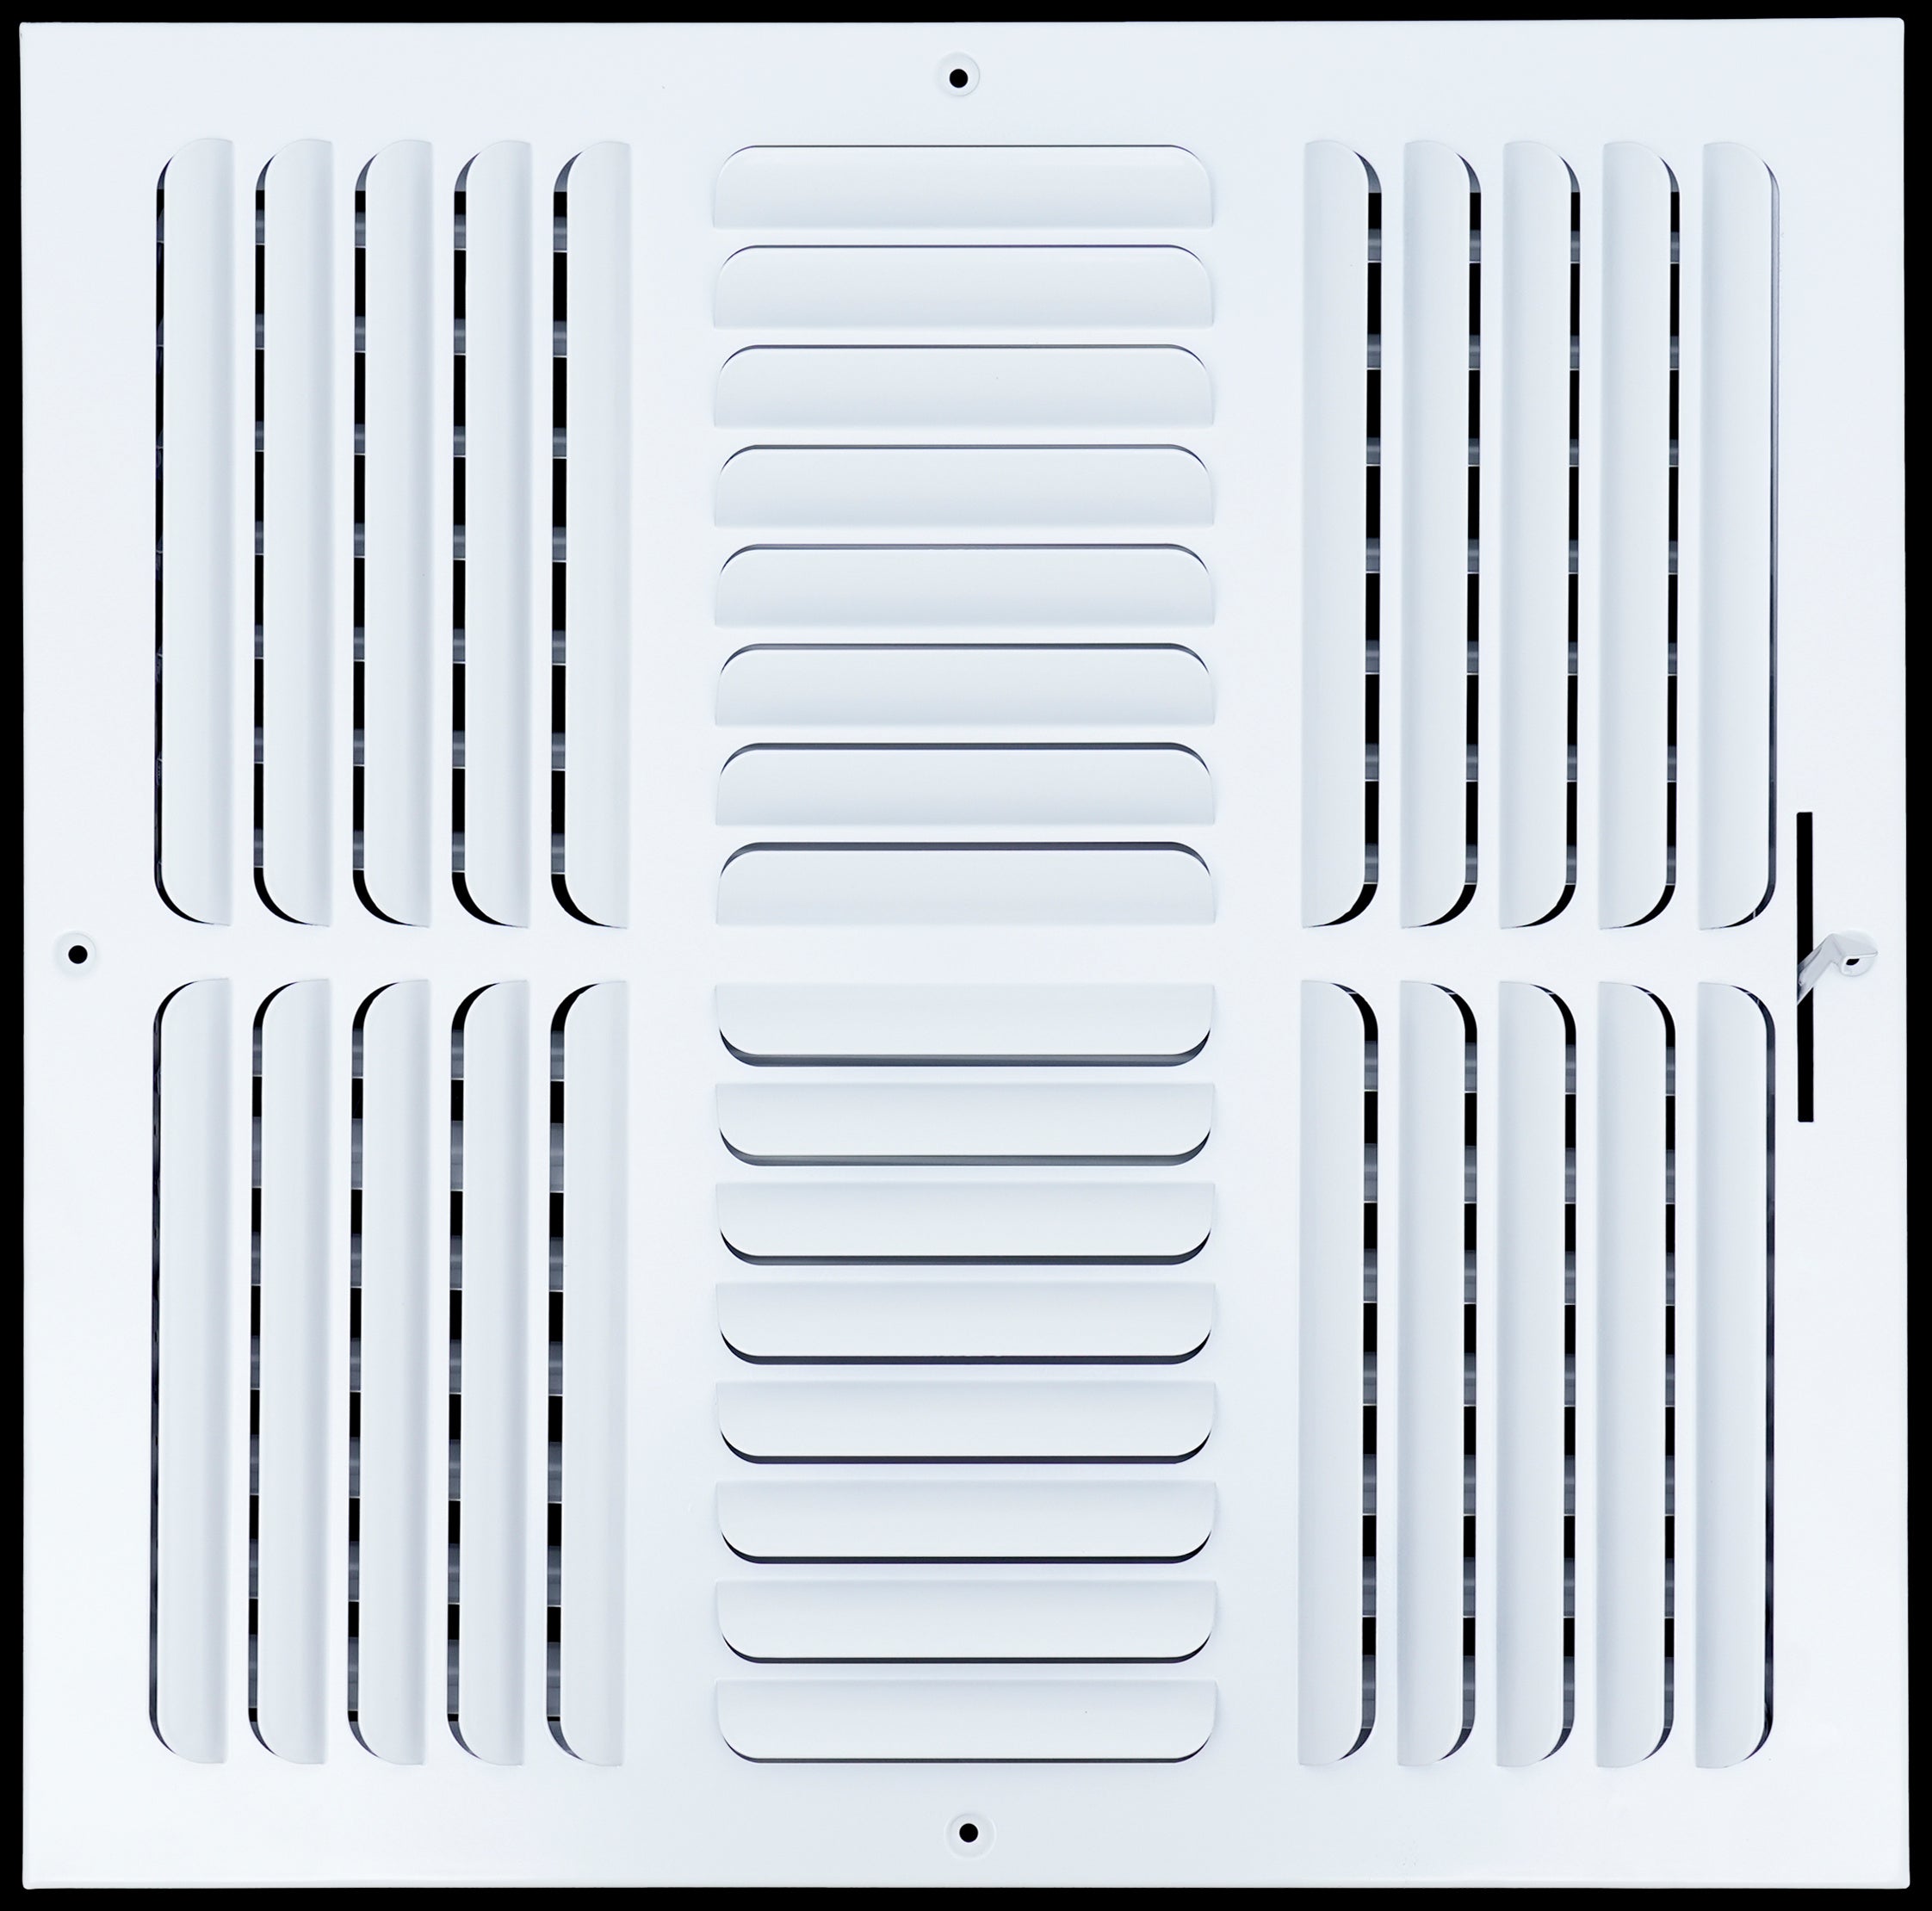 airgrilles 16"w x 16"h 4 way fixed curved blade air supply diffuser   register vent cover grill for sidewall and ceiling   white   outer dimensions: 17.75"w x 17.75"h hnd-cb-wh-4way-16x16  - 1